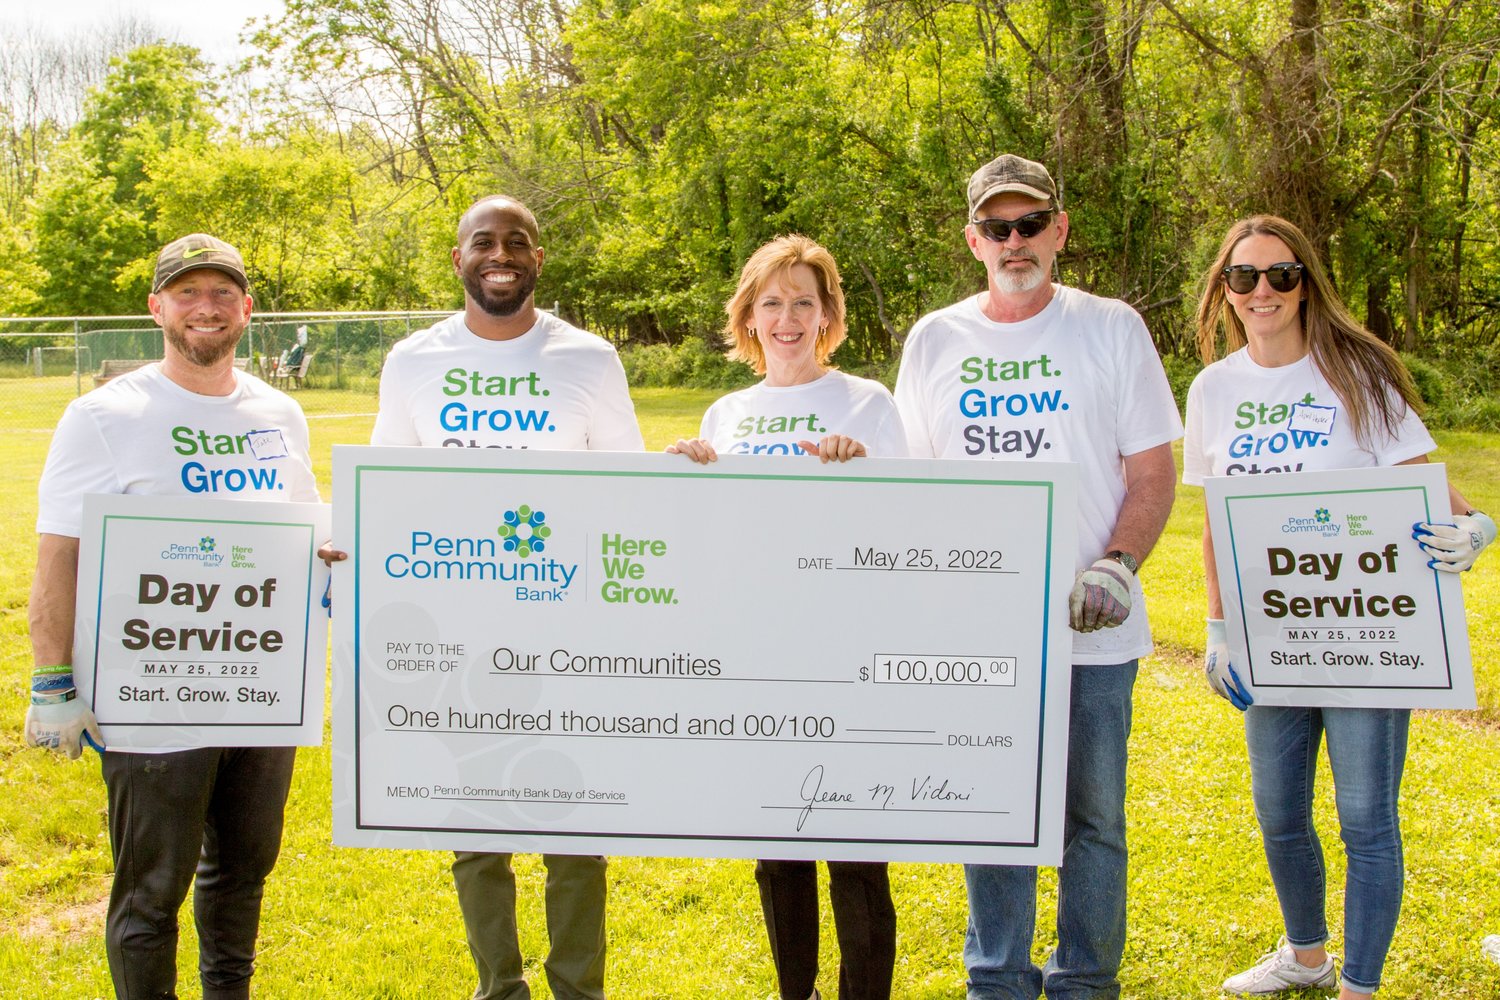 Employees hold signs and a ceremonial check reflecting Penn Community Bank’s Day of Service.